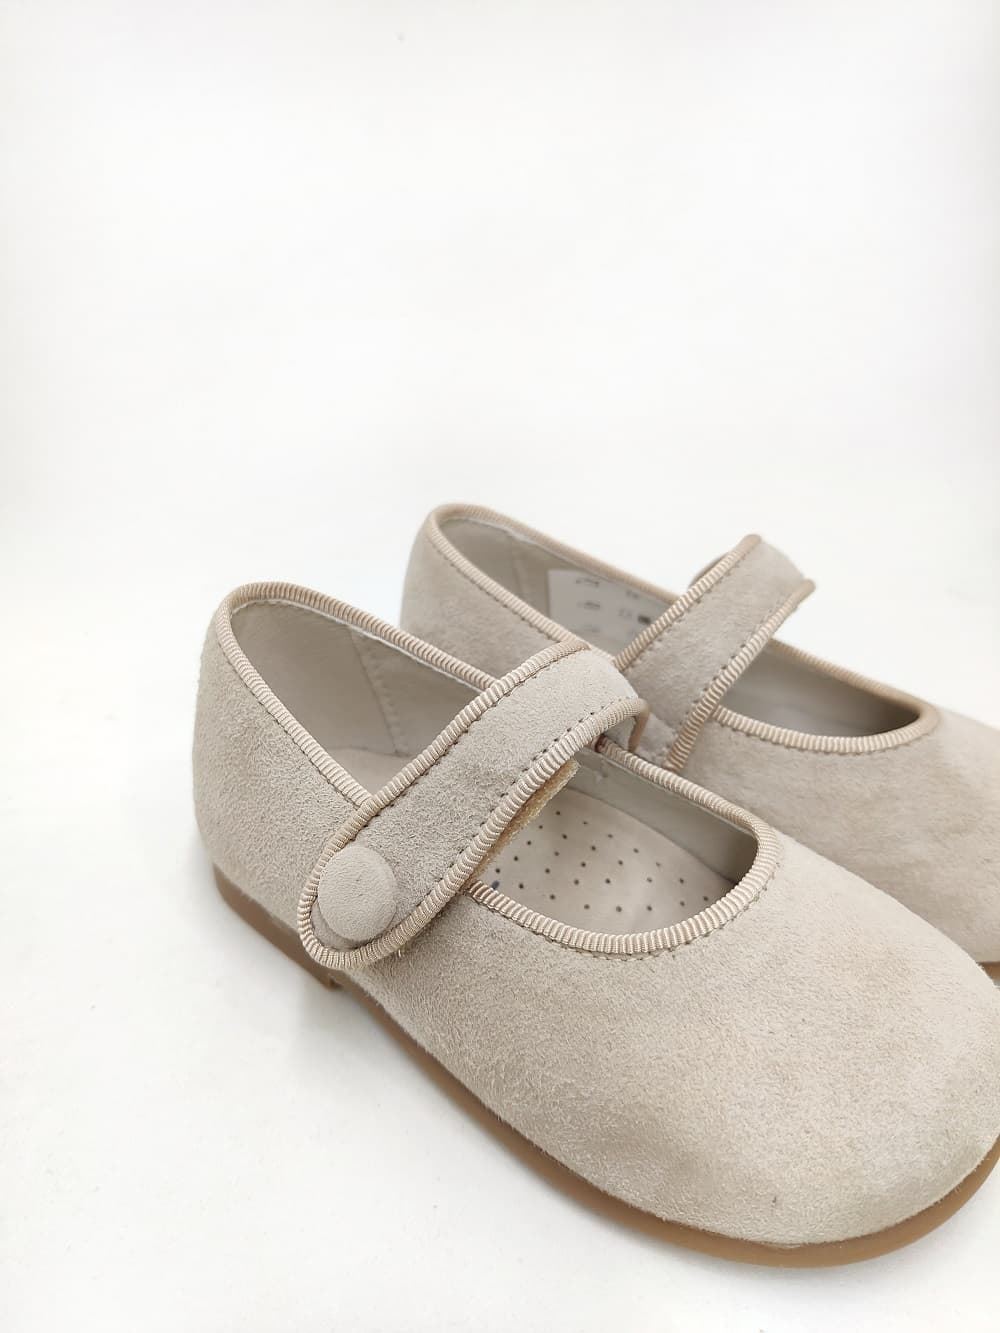 Pirufin (Piruflex) Mary Janes for baby girls in Taupe suede - Image 3